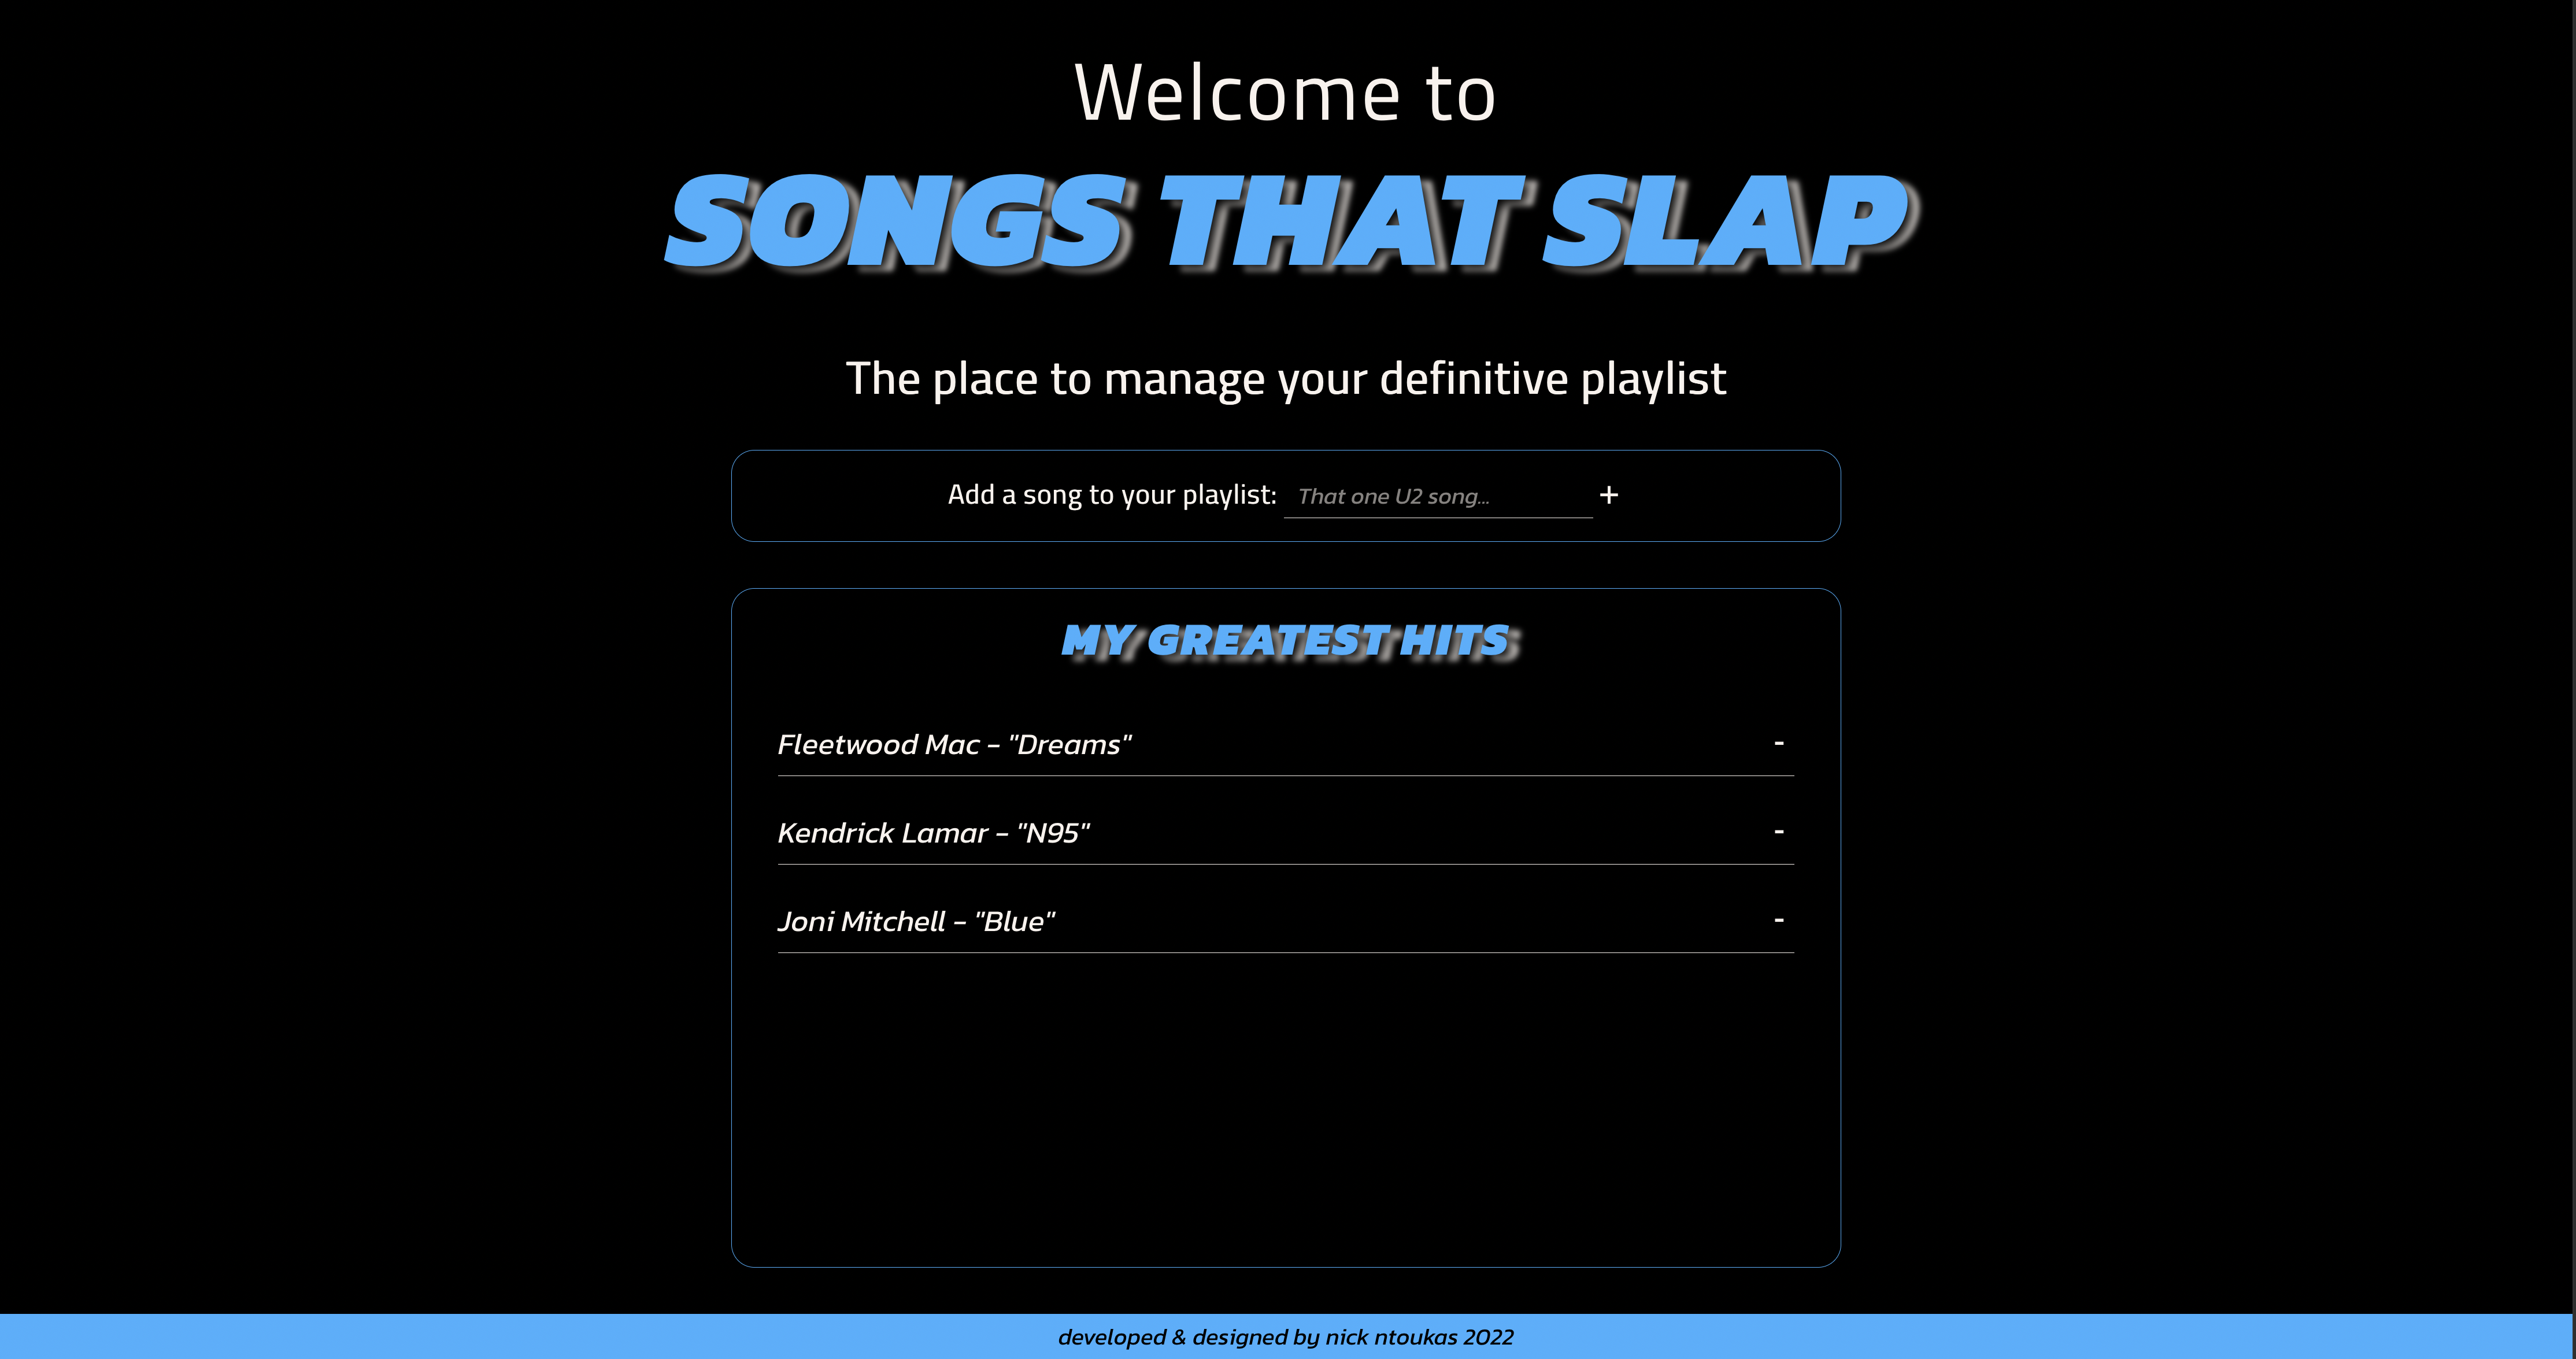 Project 'Songs that slap' home landing page